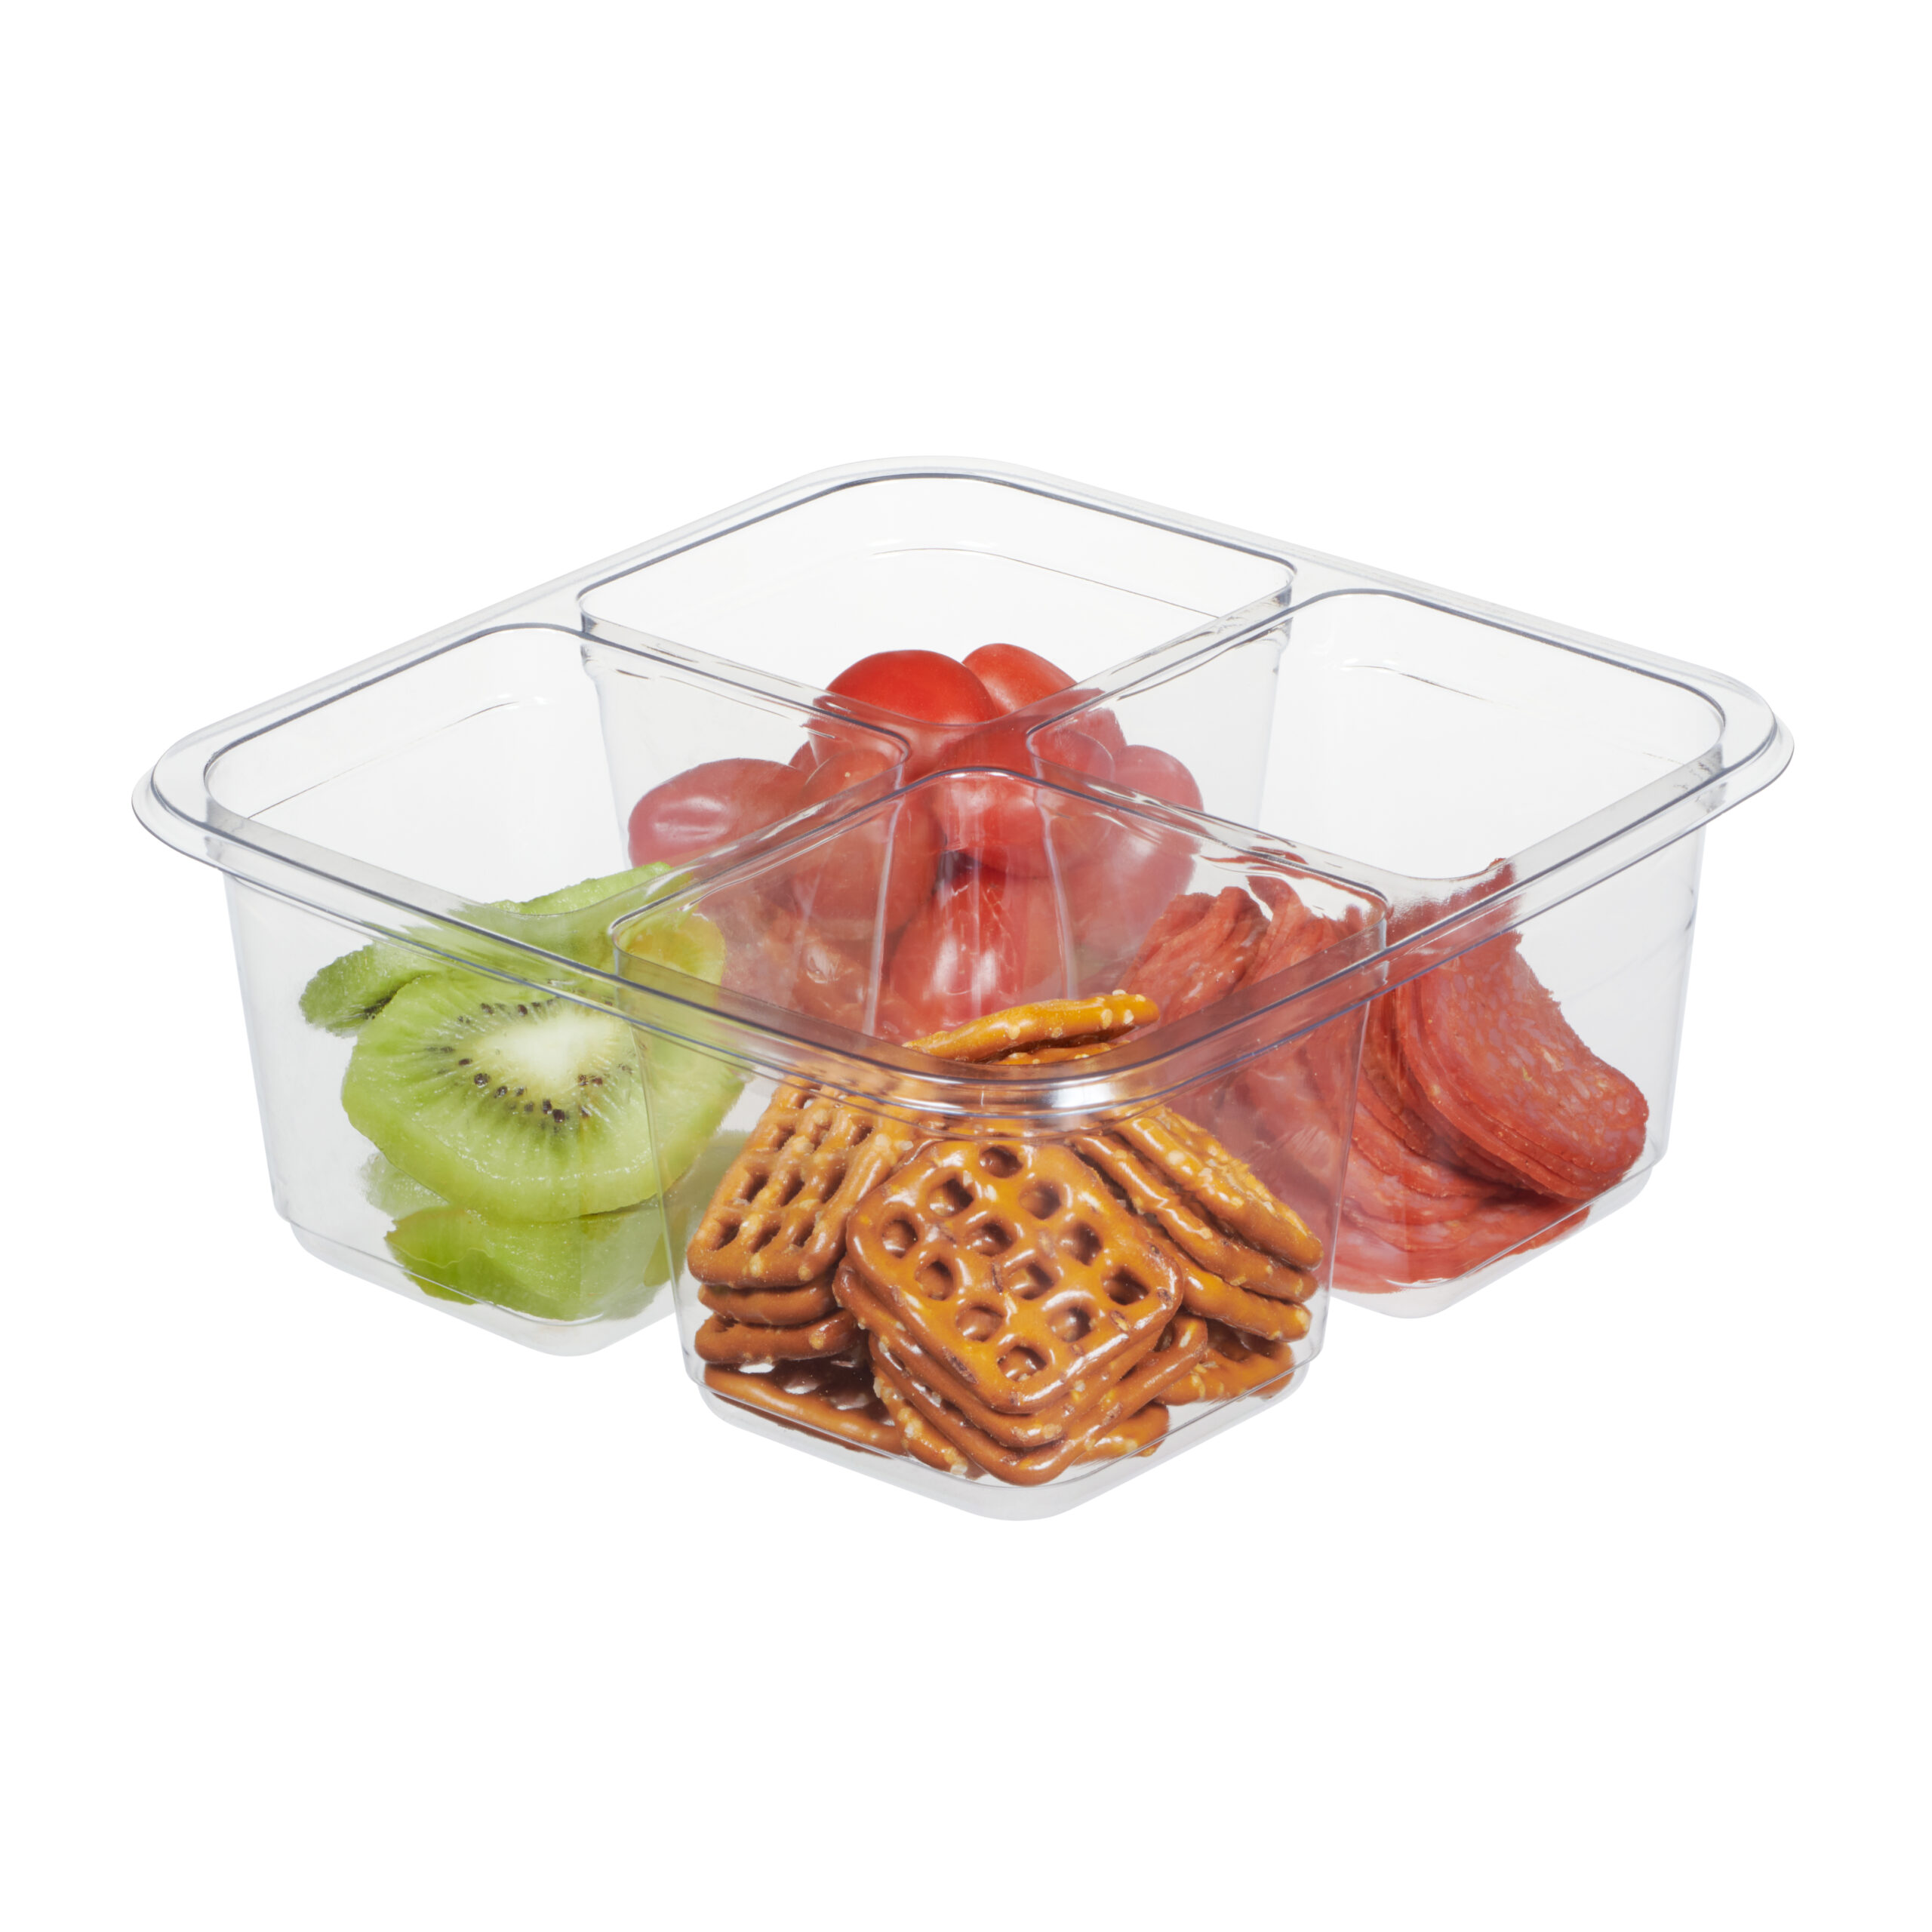 Clear plastic 4 compartment food tray with kiwi, pretzels, pepperoni and grape tomatoes